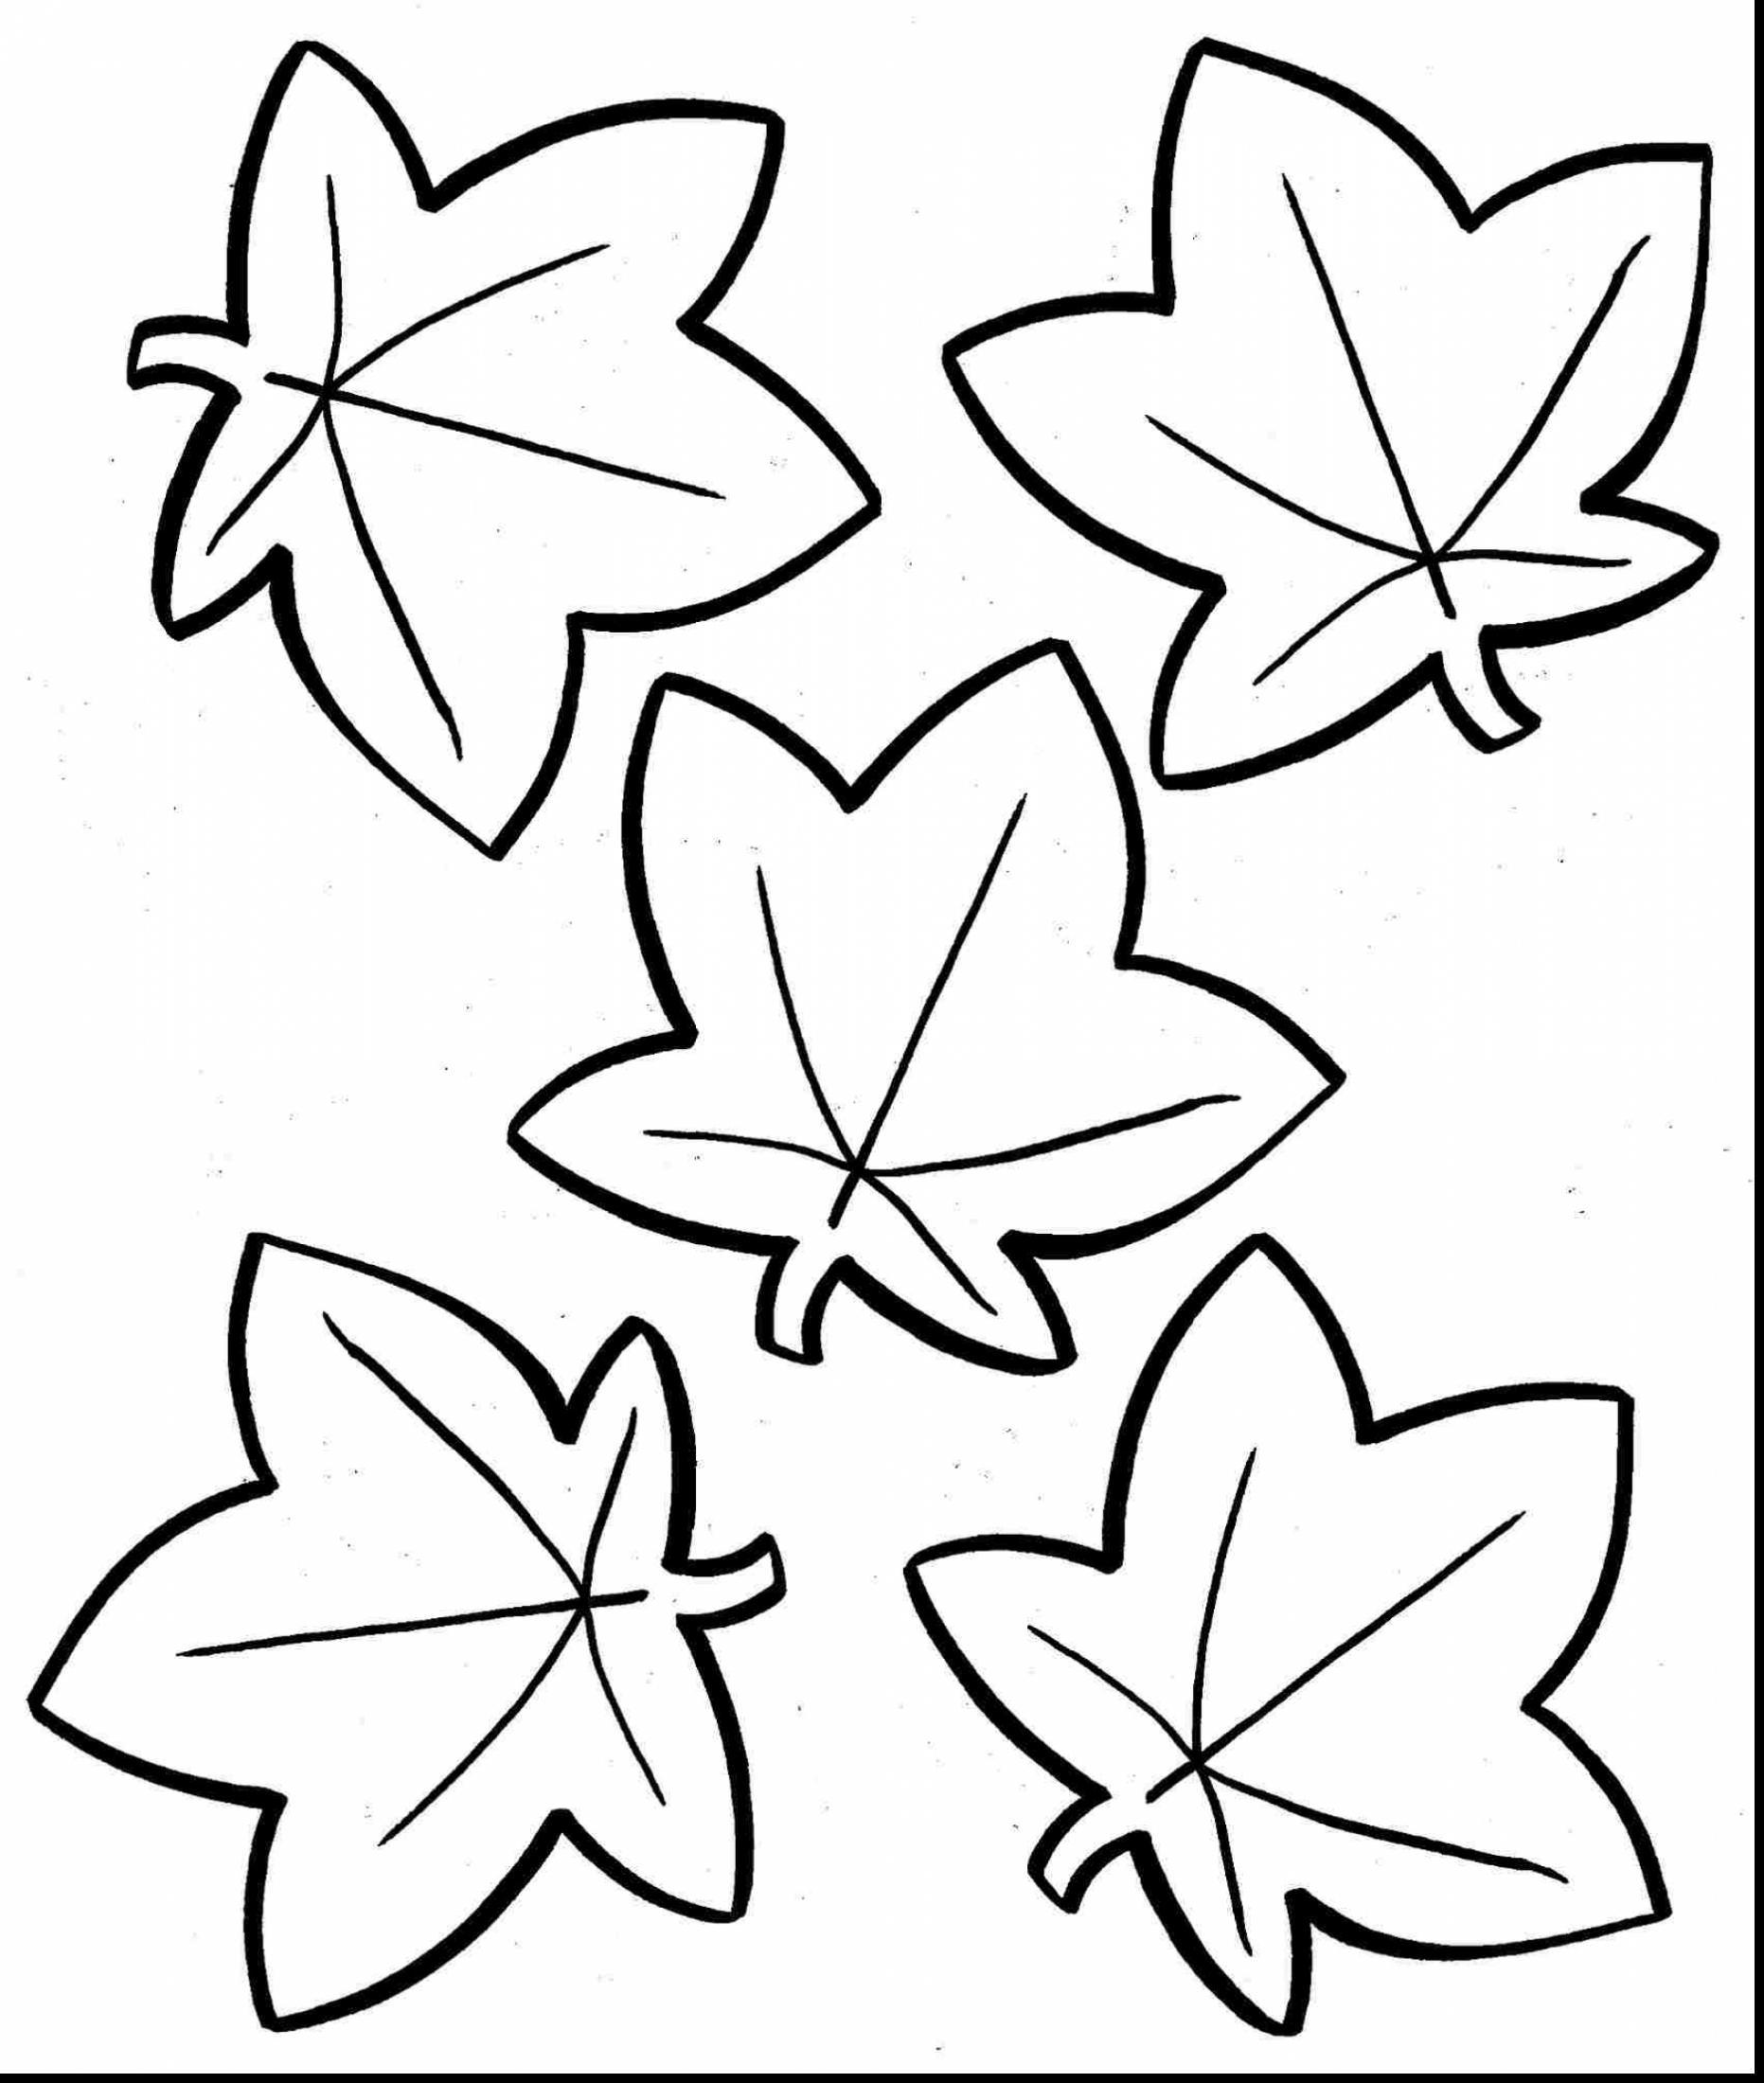 autumn-leaves-and-acorns-coloring-page-free-printable-coloring-pages